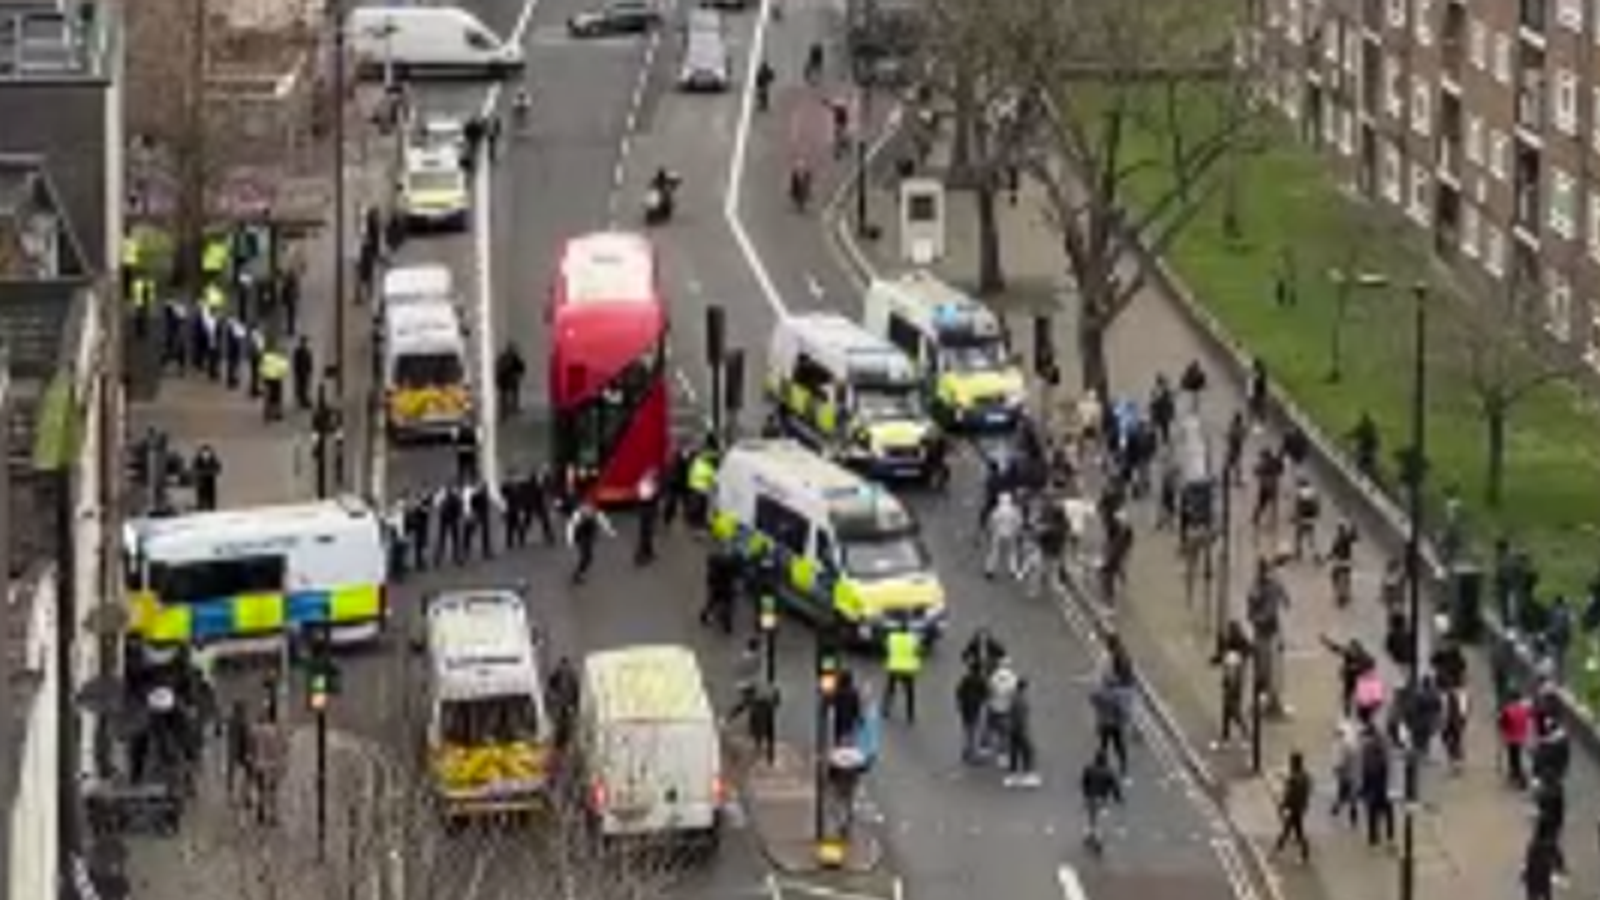 Southwark: Four officers injured in clashes with protesters in south London - as police arrest eight people